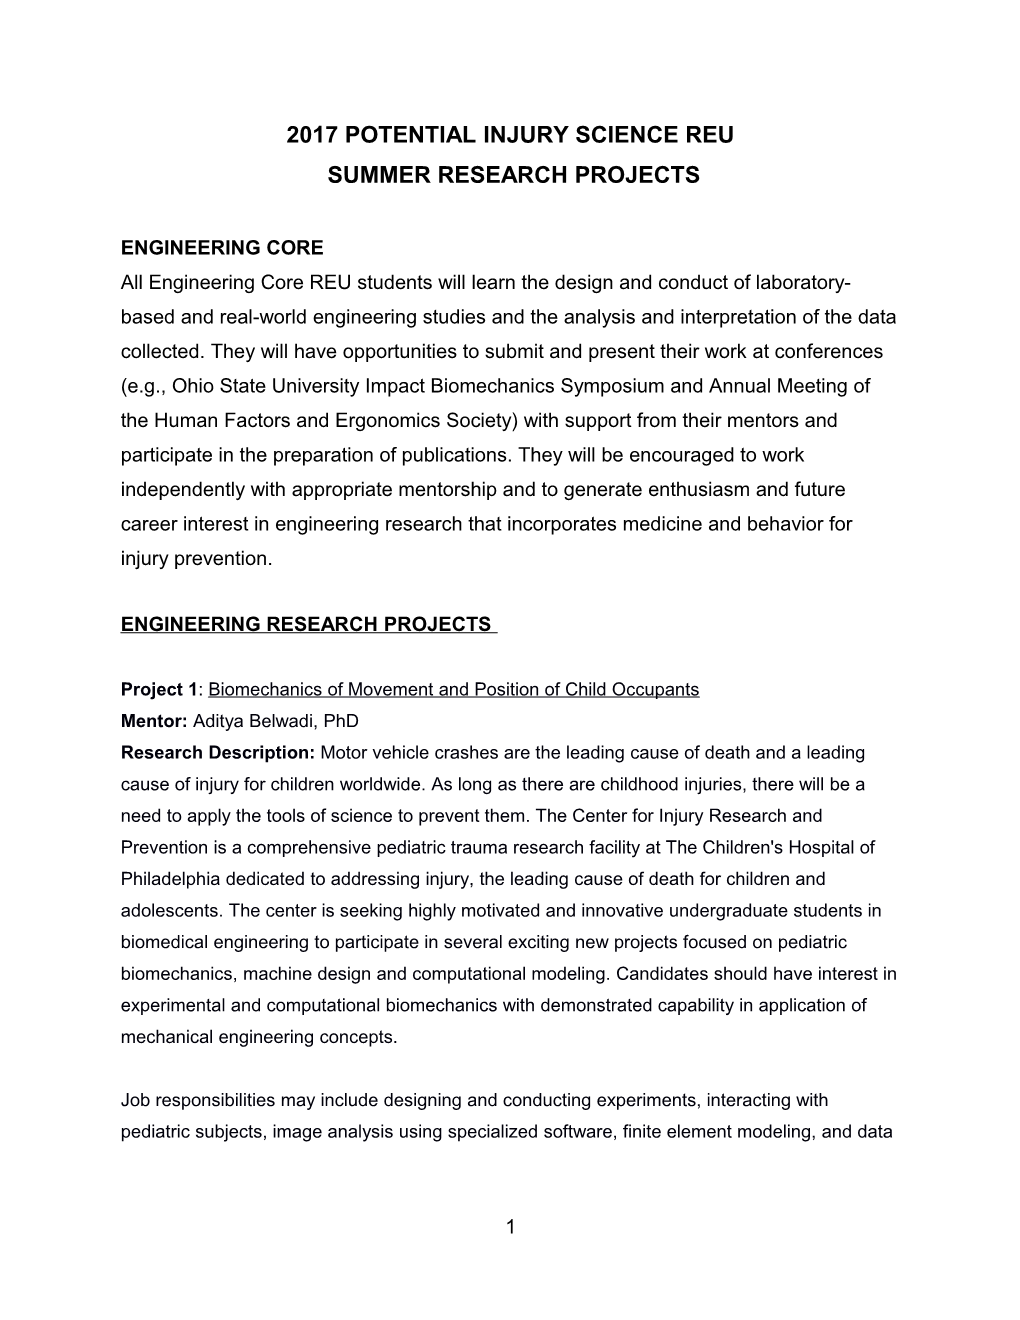 2017 Potential Injury Science Reu Summer Research Projects